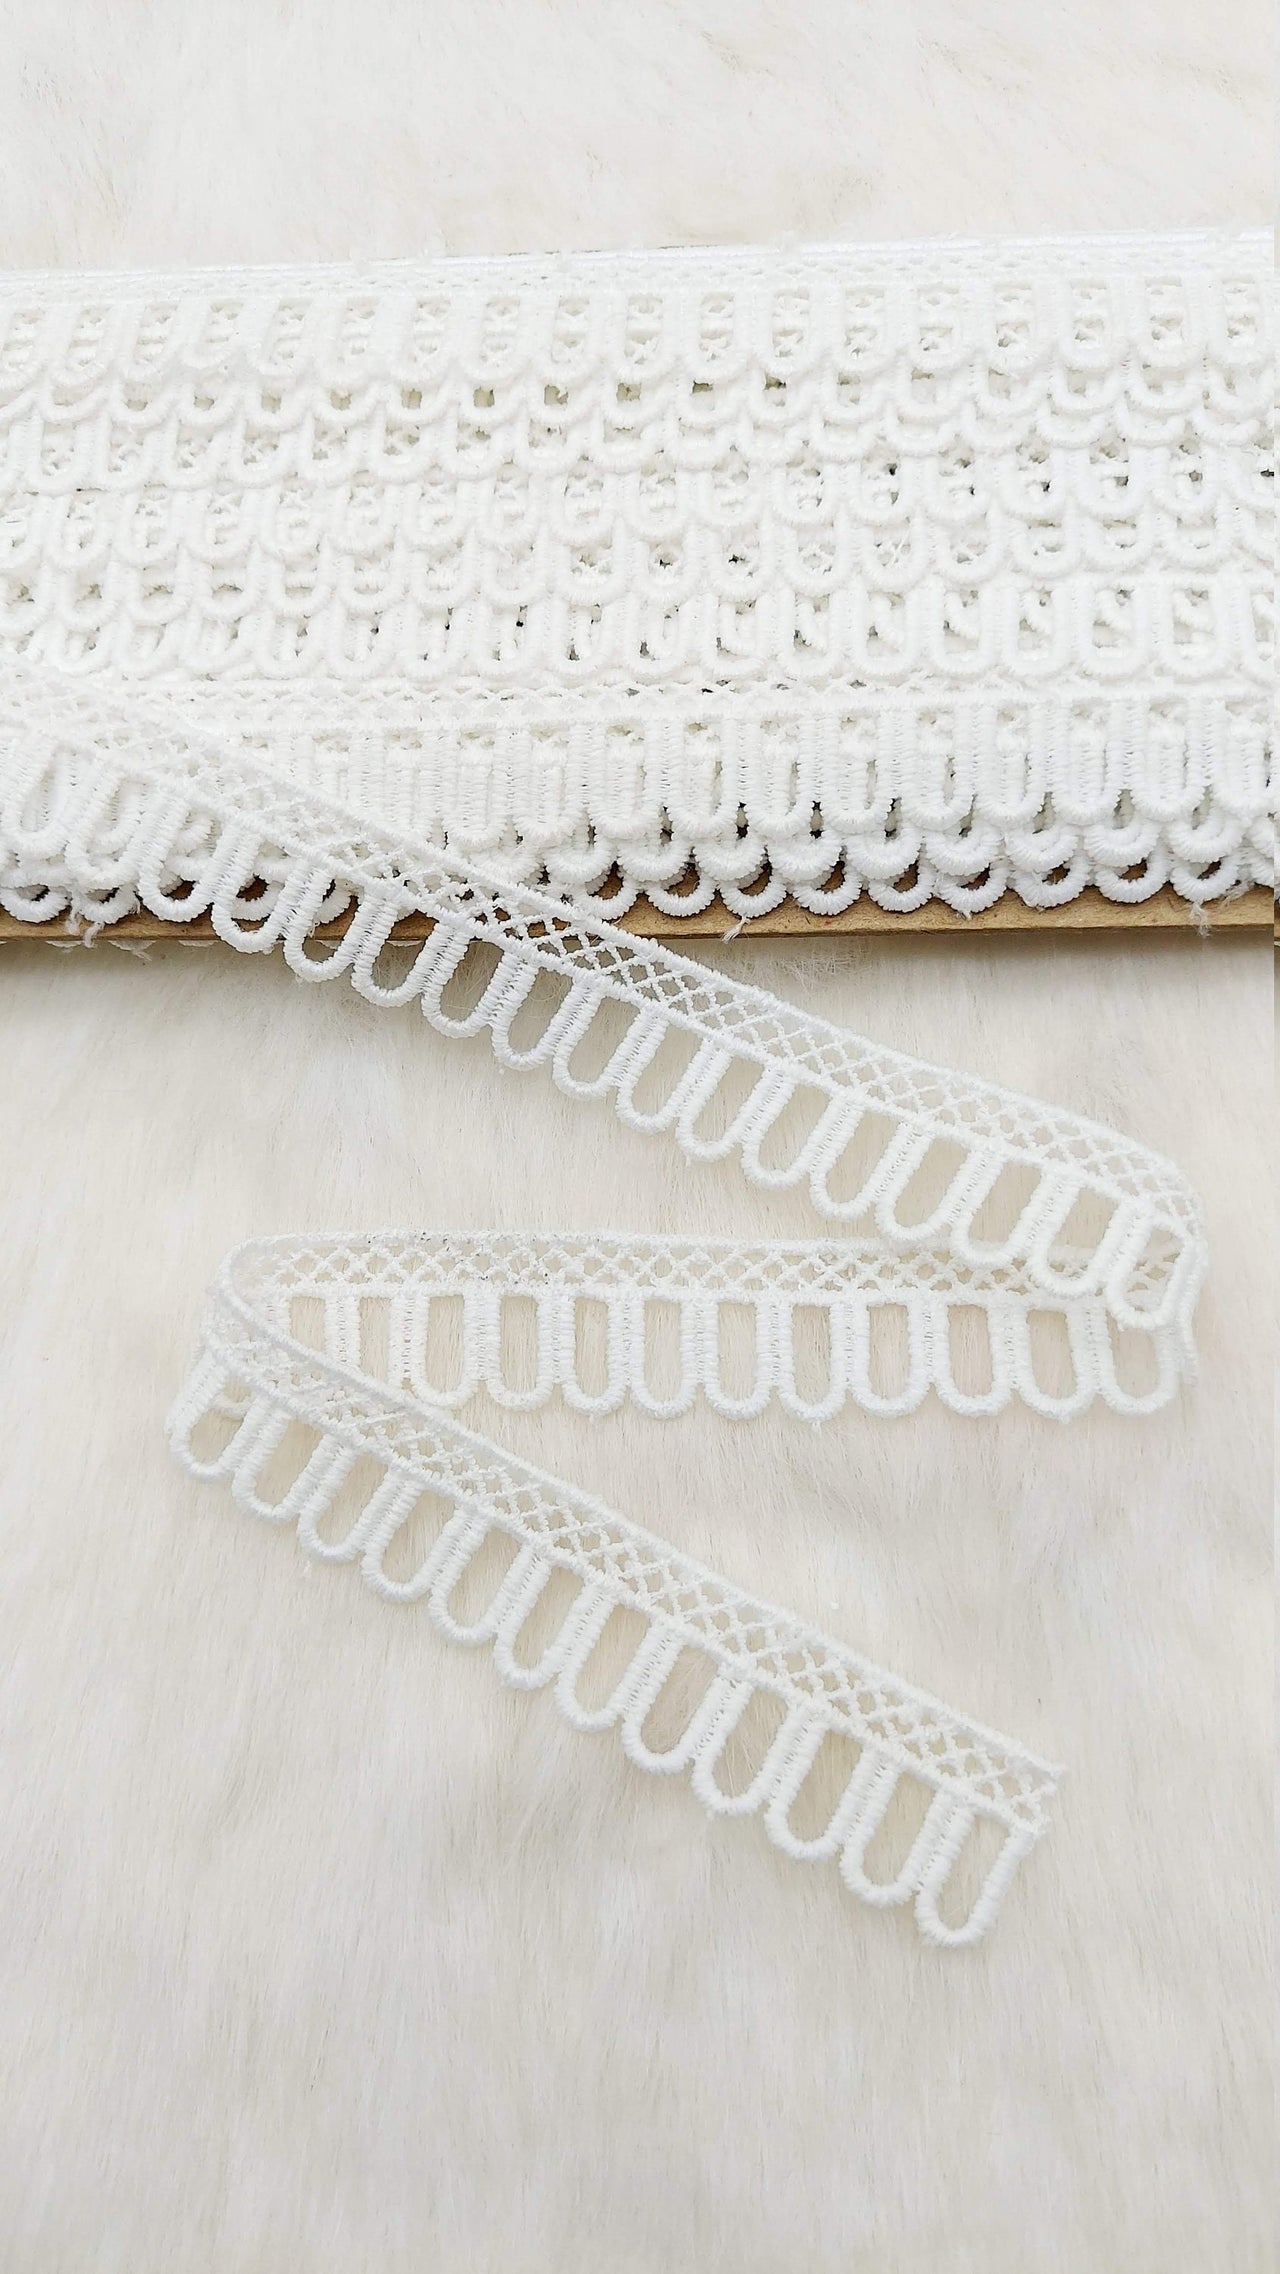 9 Yards White Embroidery Cotton Lace Trim, Approx. 20mm Wide, Fringe Trim